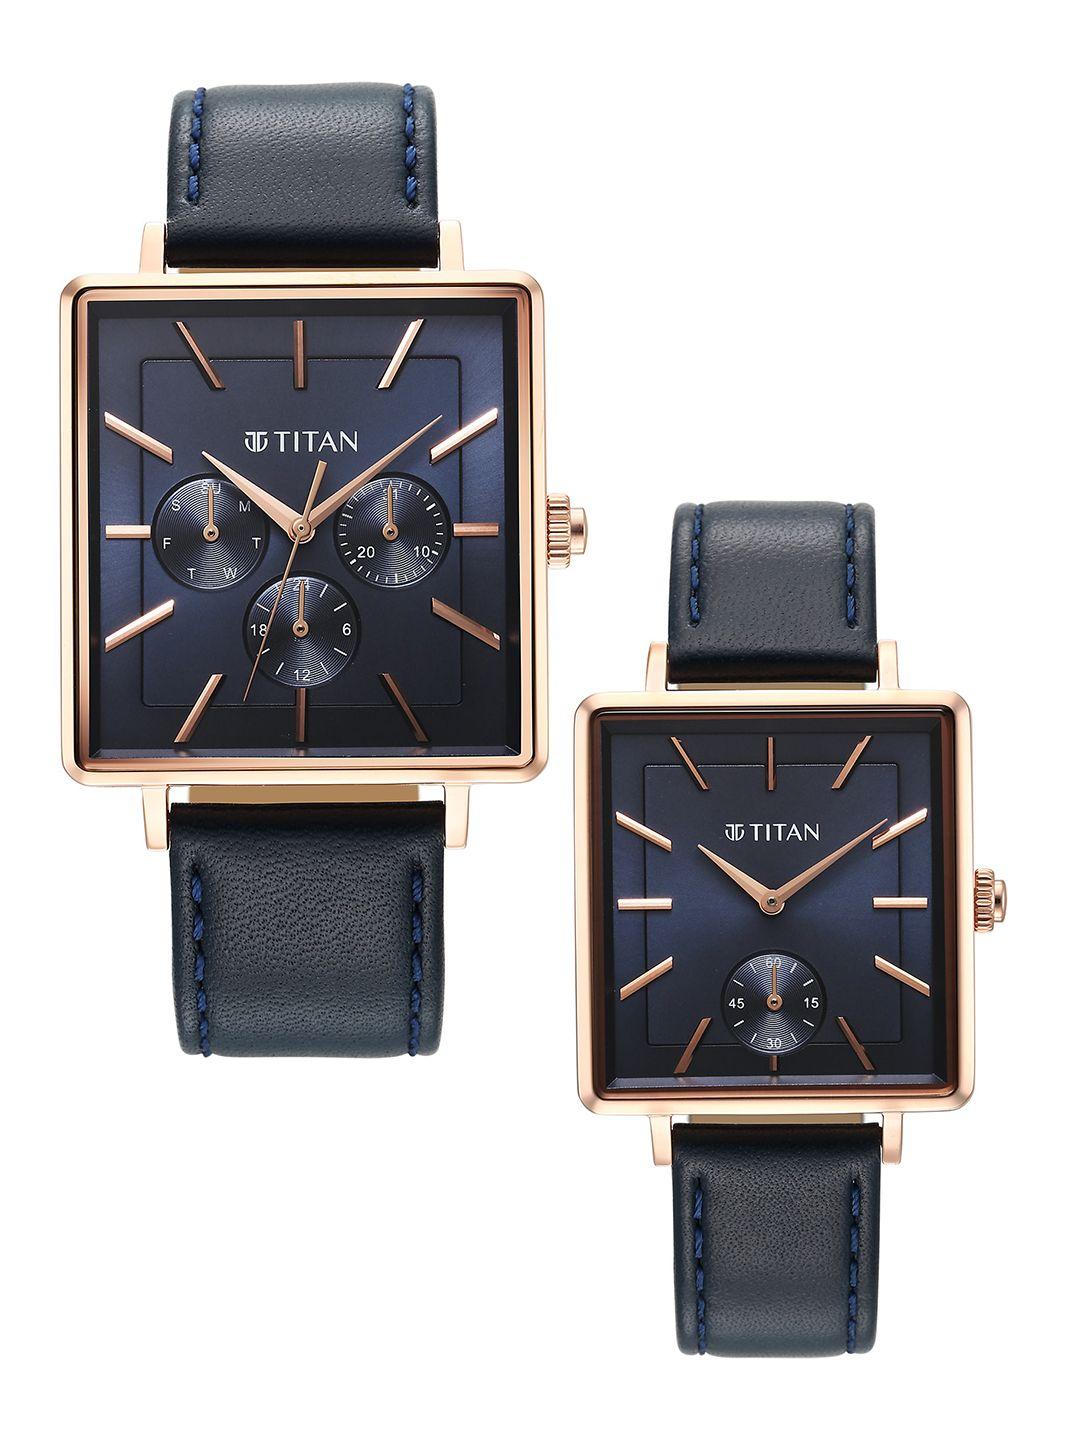 titan set of 2 dial & leather straps analogue couple analogue watch 9400594205wl01